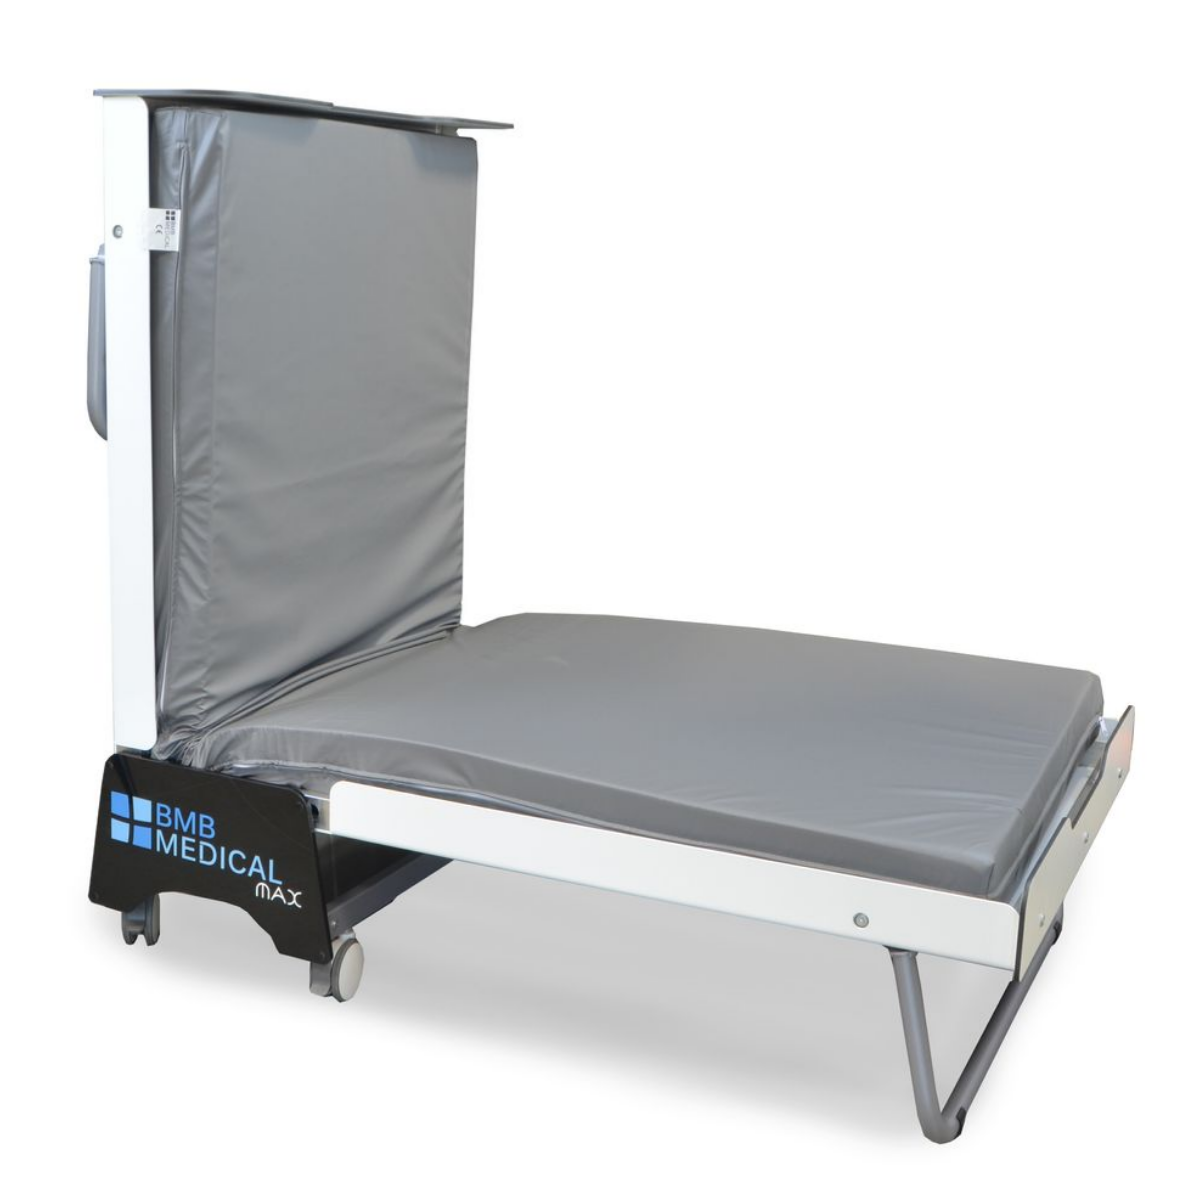 Max Single folding bed with mattress by BMB Medical